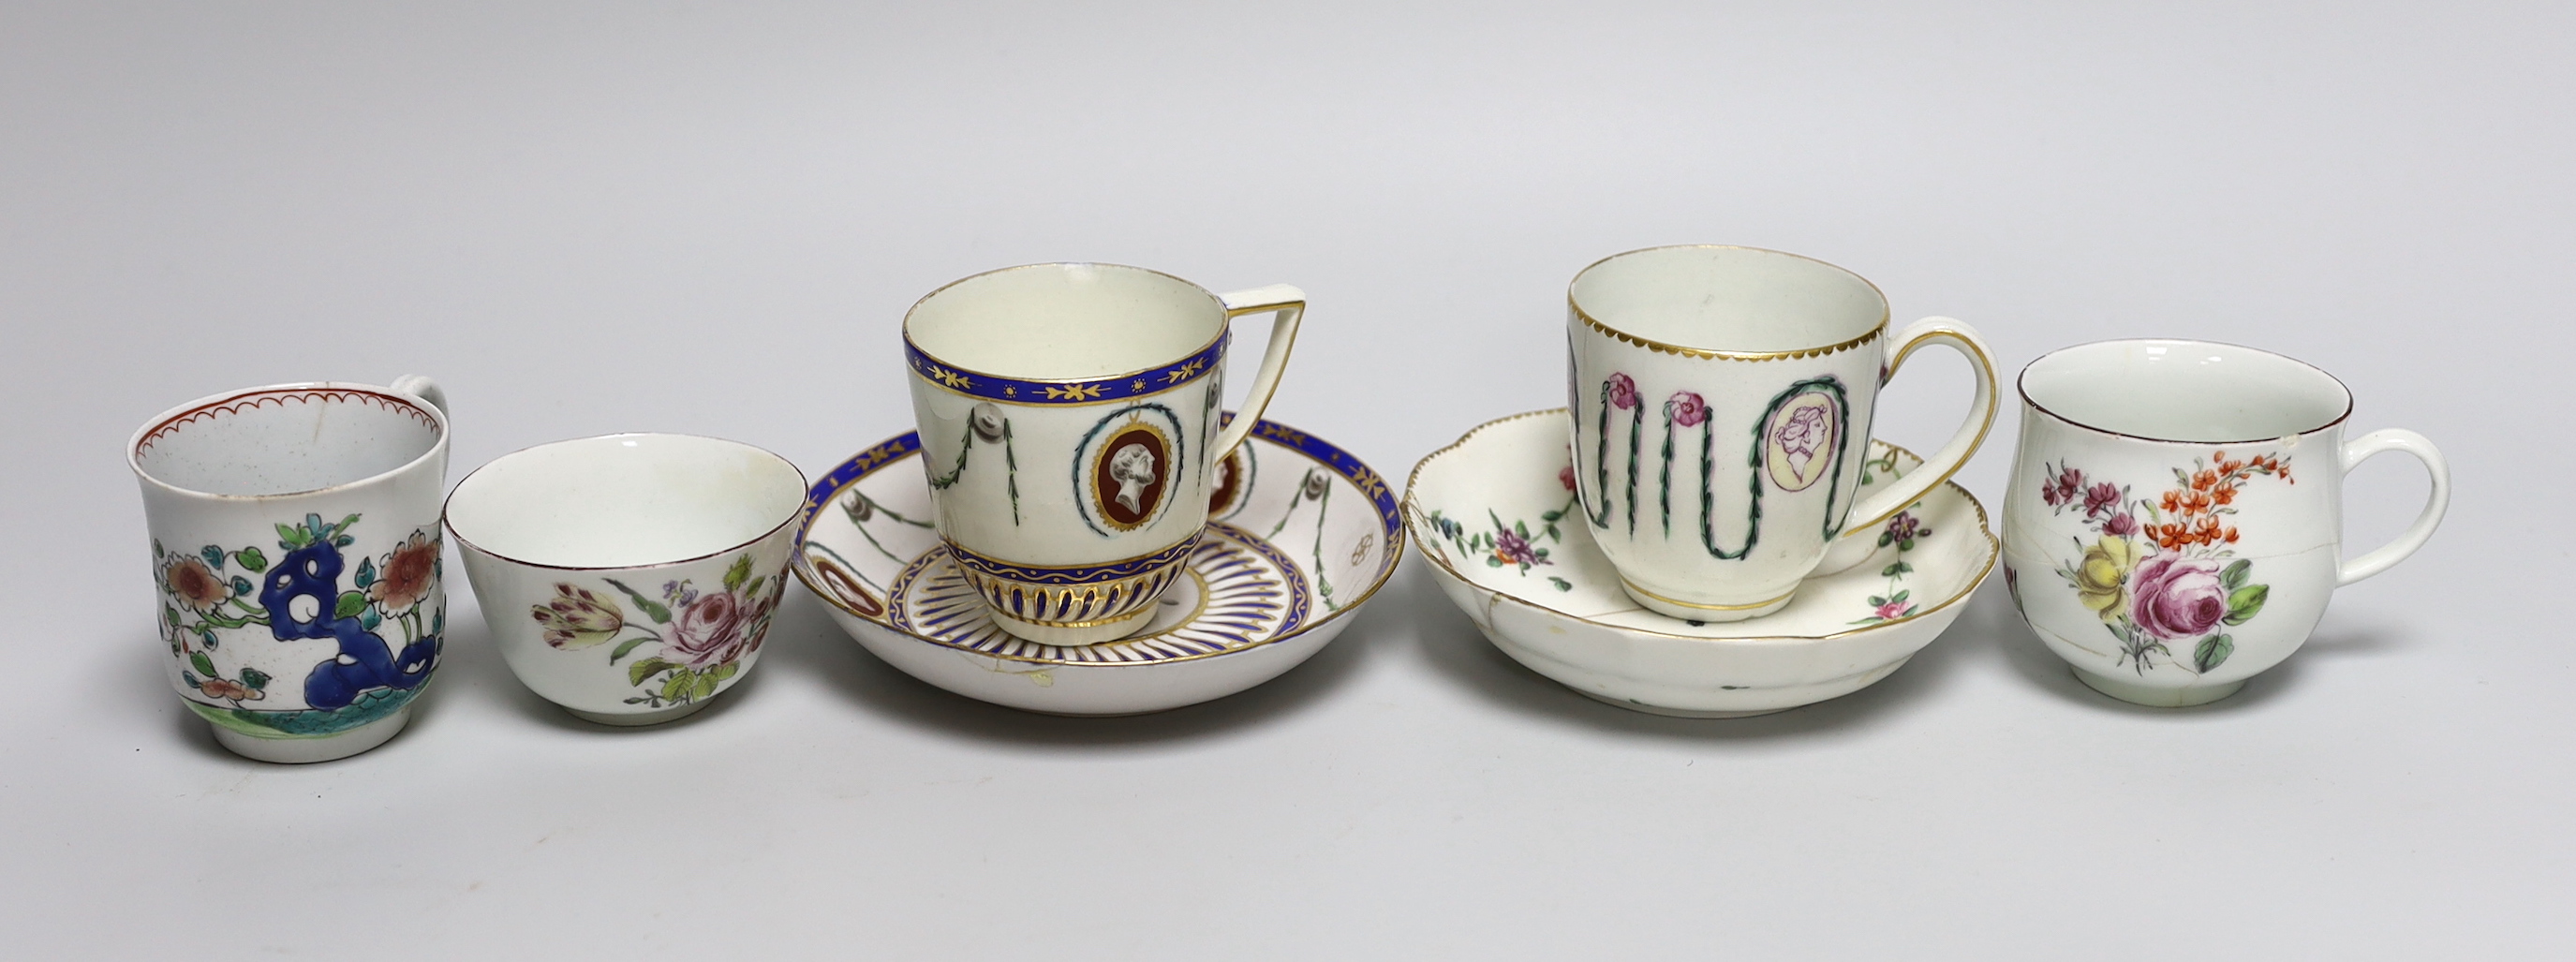 A Chelsea red anchor teabowl and coffee cup, c.1755, a Bow coffee cup, c.1760, a Derby Portrait